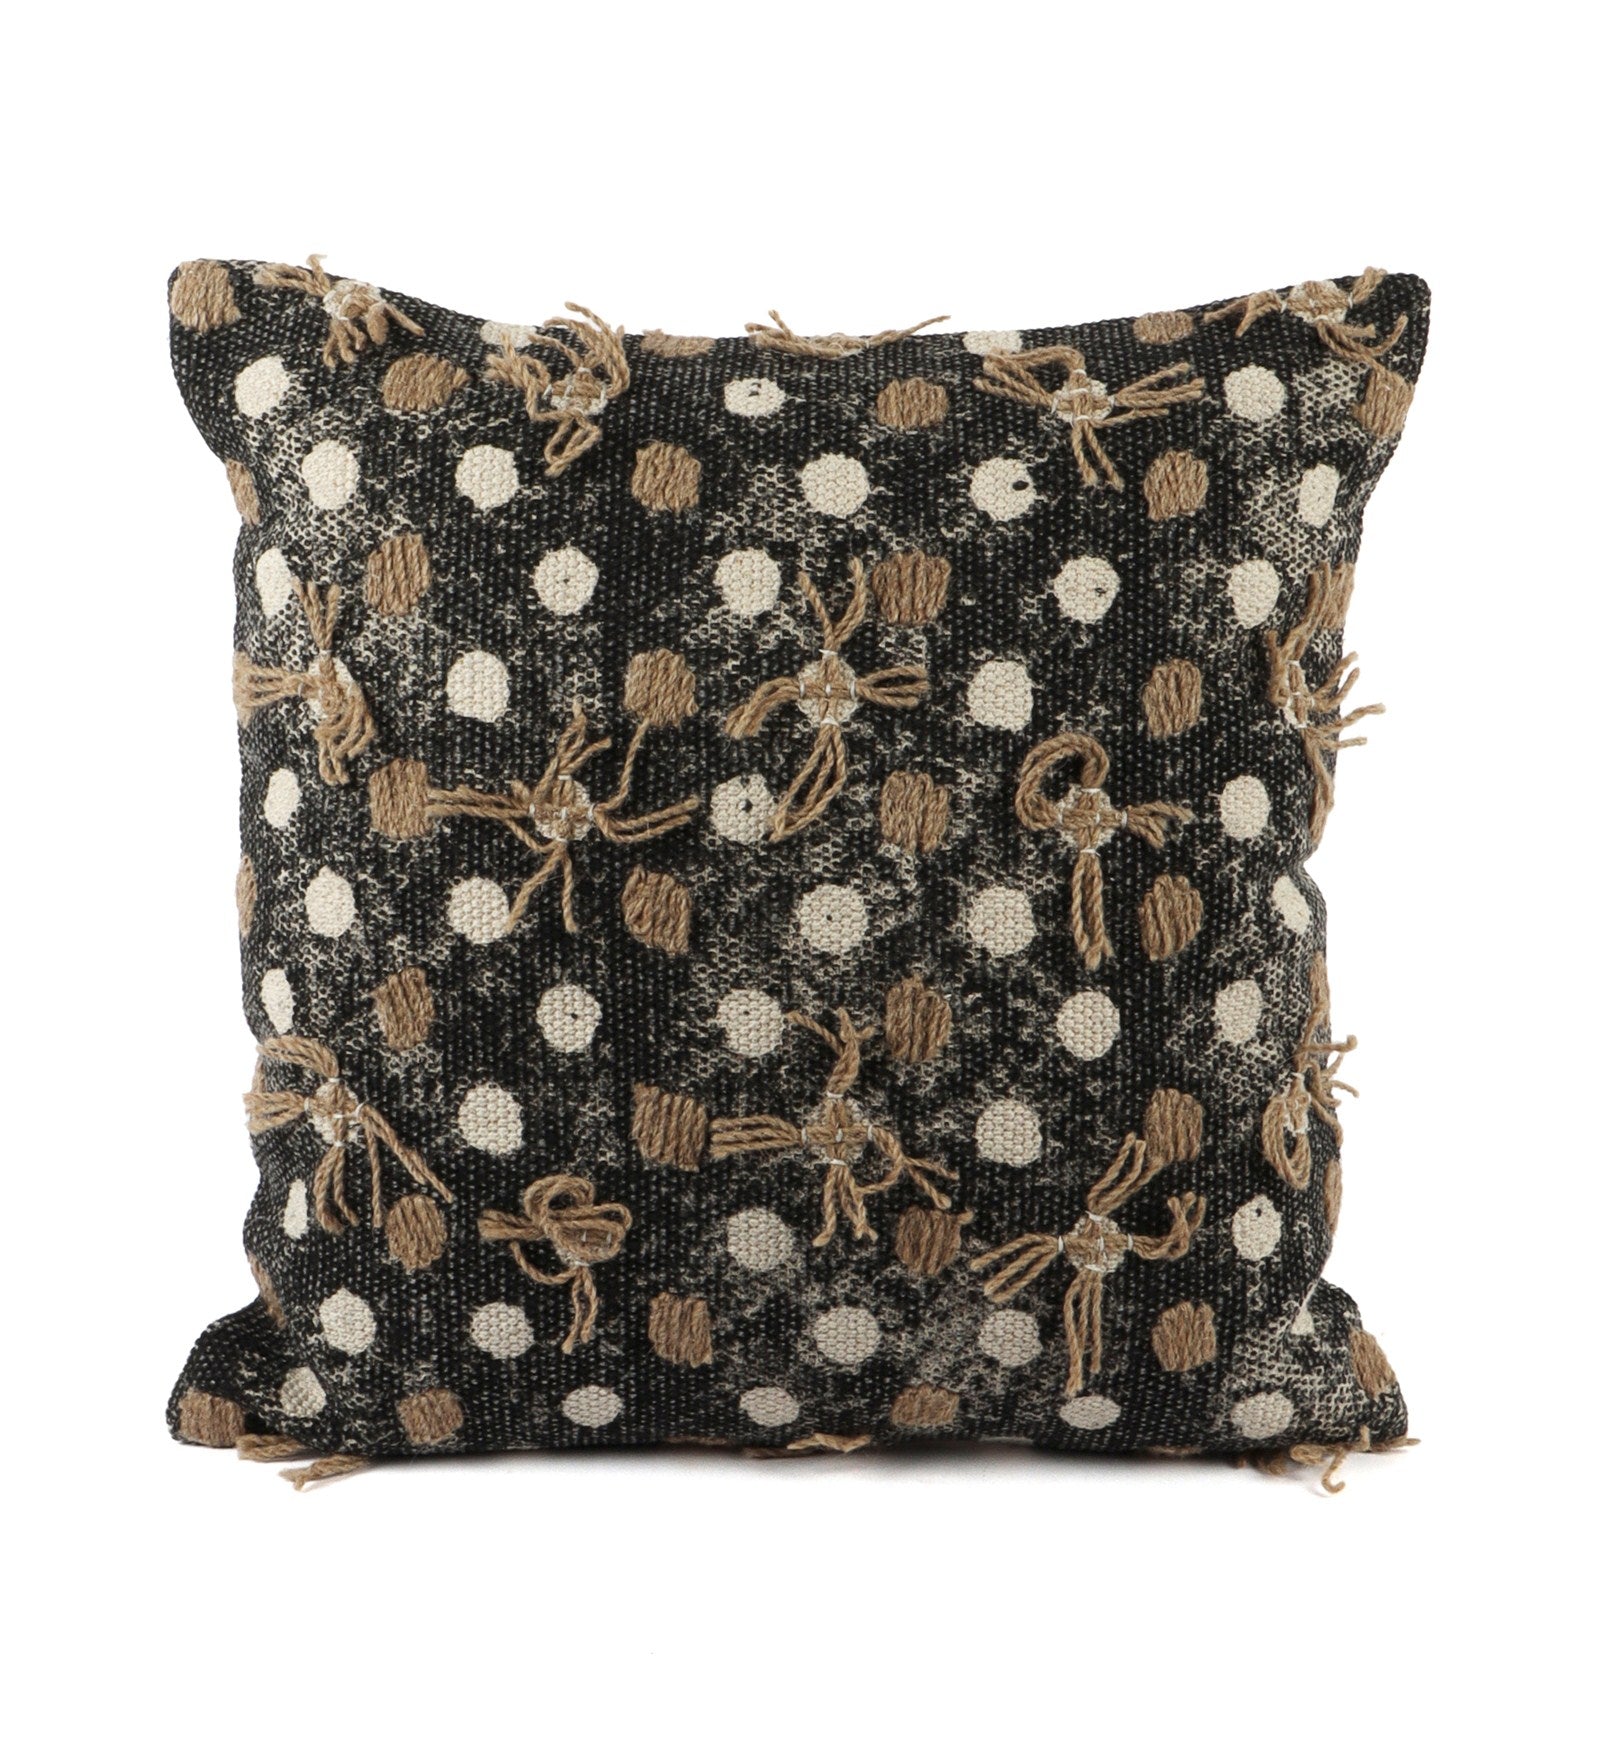 Embroidered Contemporary Cushion Cover (Beige-Black Polka Dots)